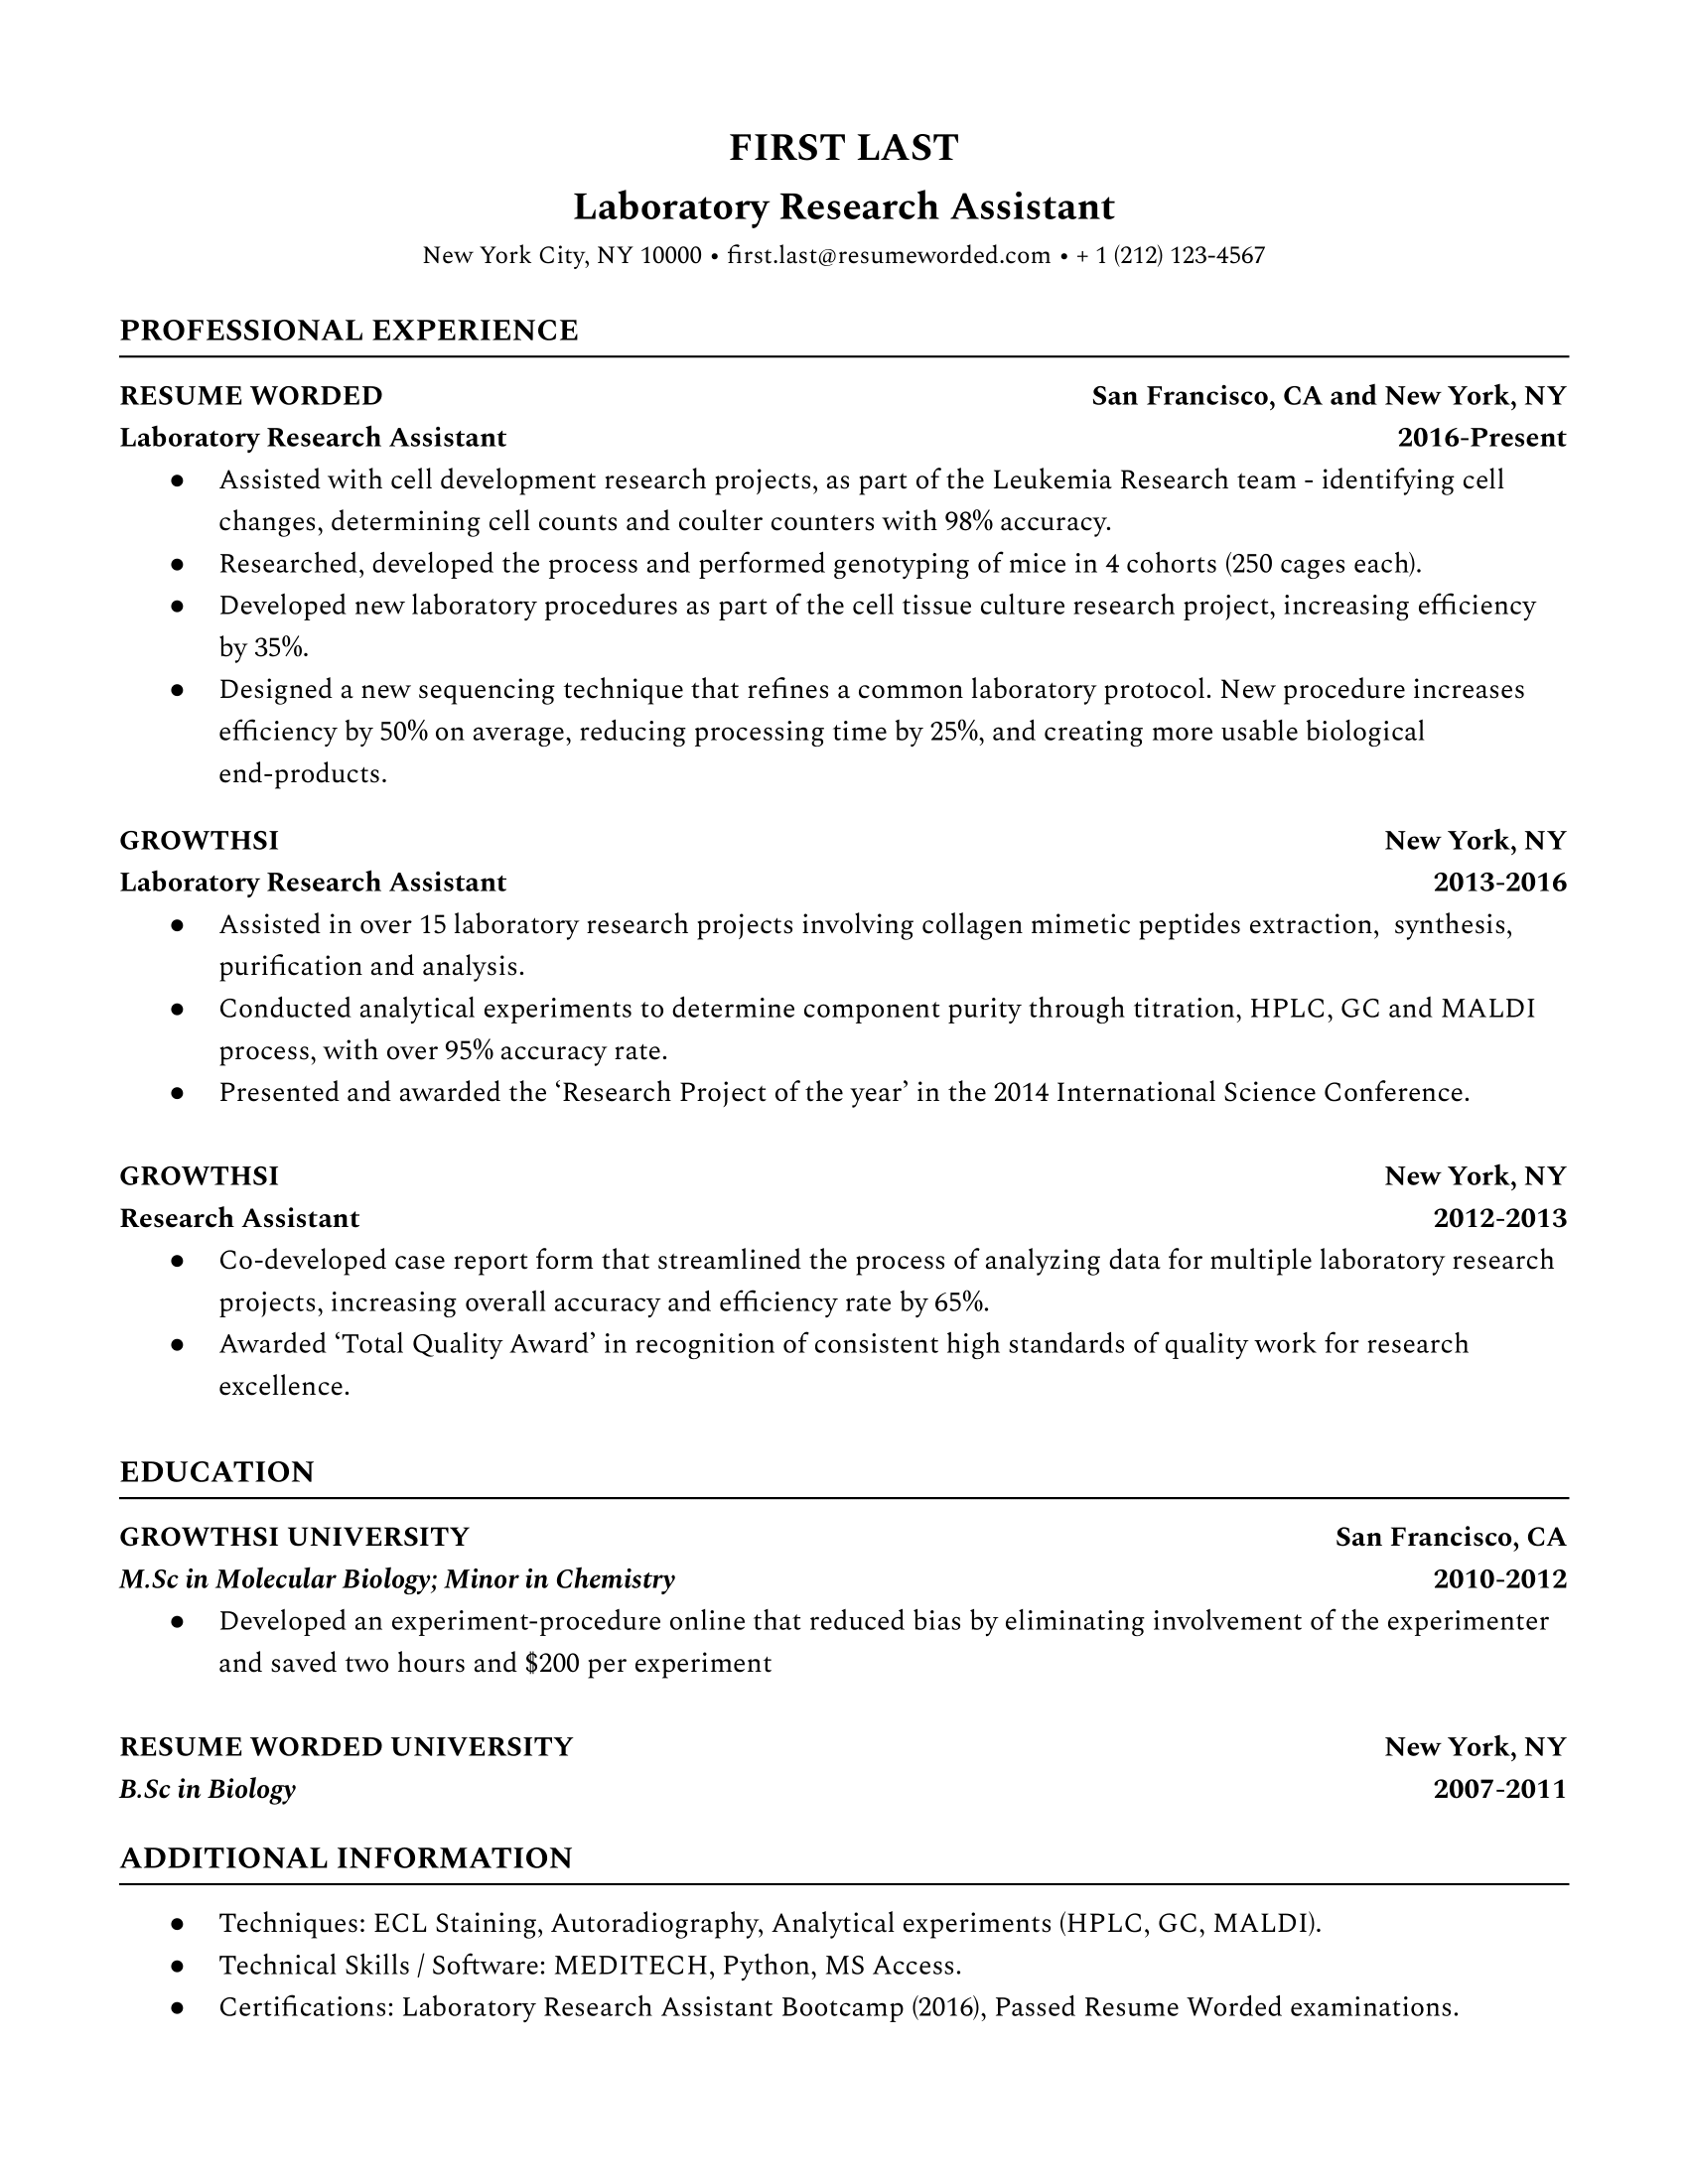 Laboratory Research Assistant Resume Sample